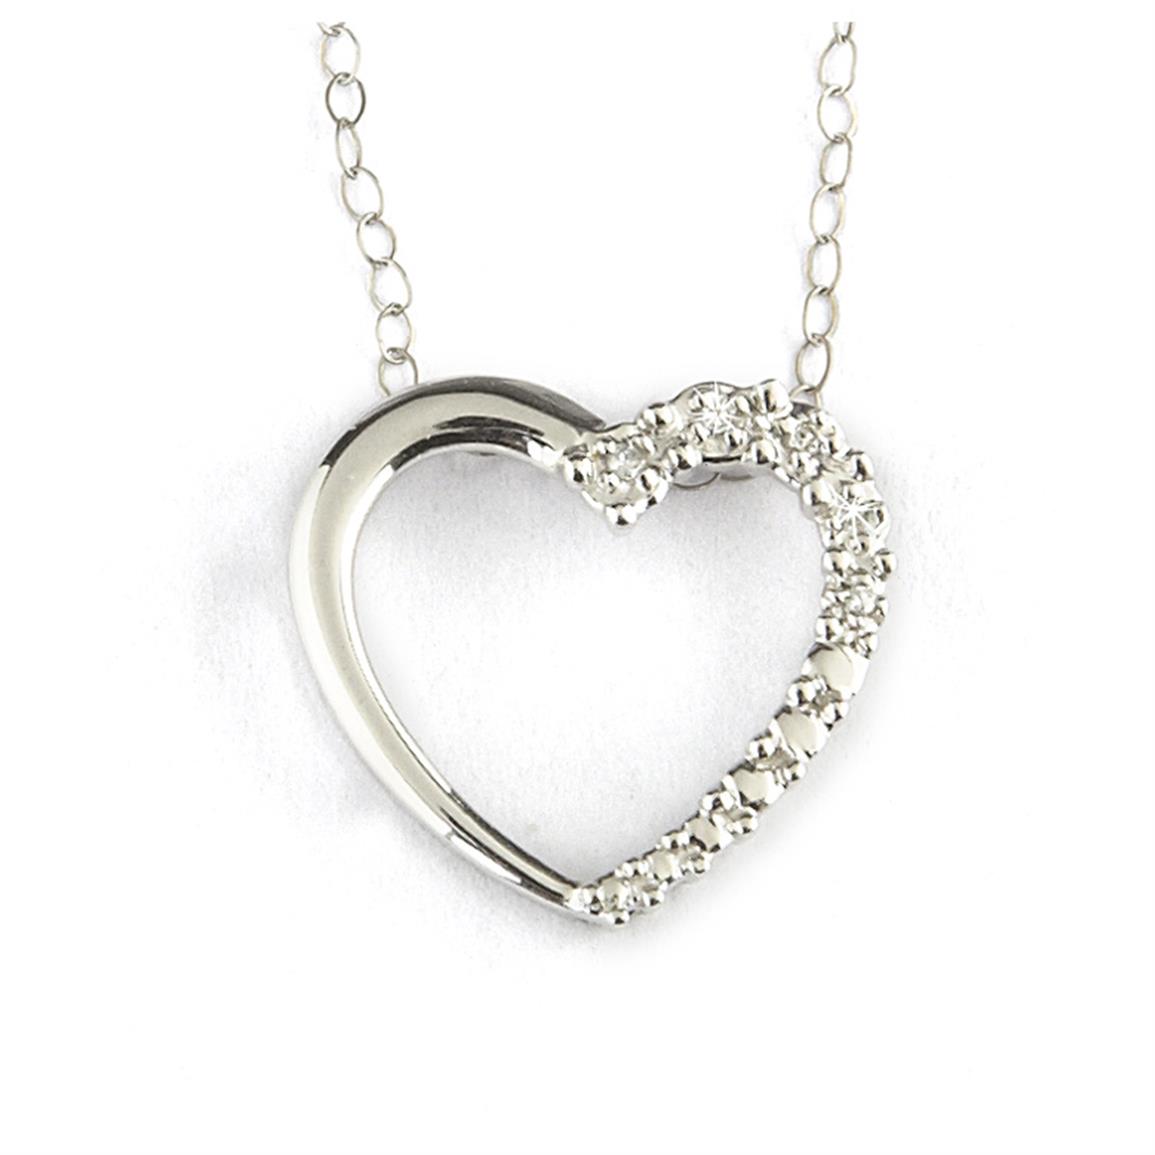 ... Accessories  Jewelry  10K White Gold Diamond Accent Heart Necklace